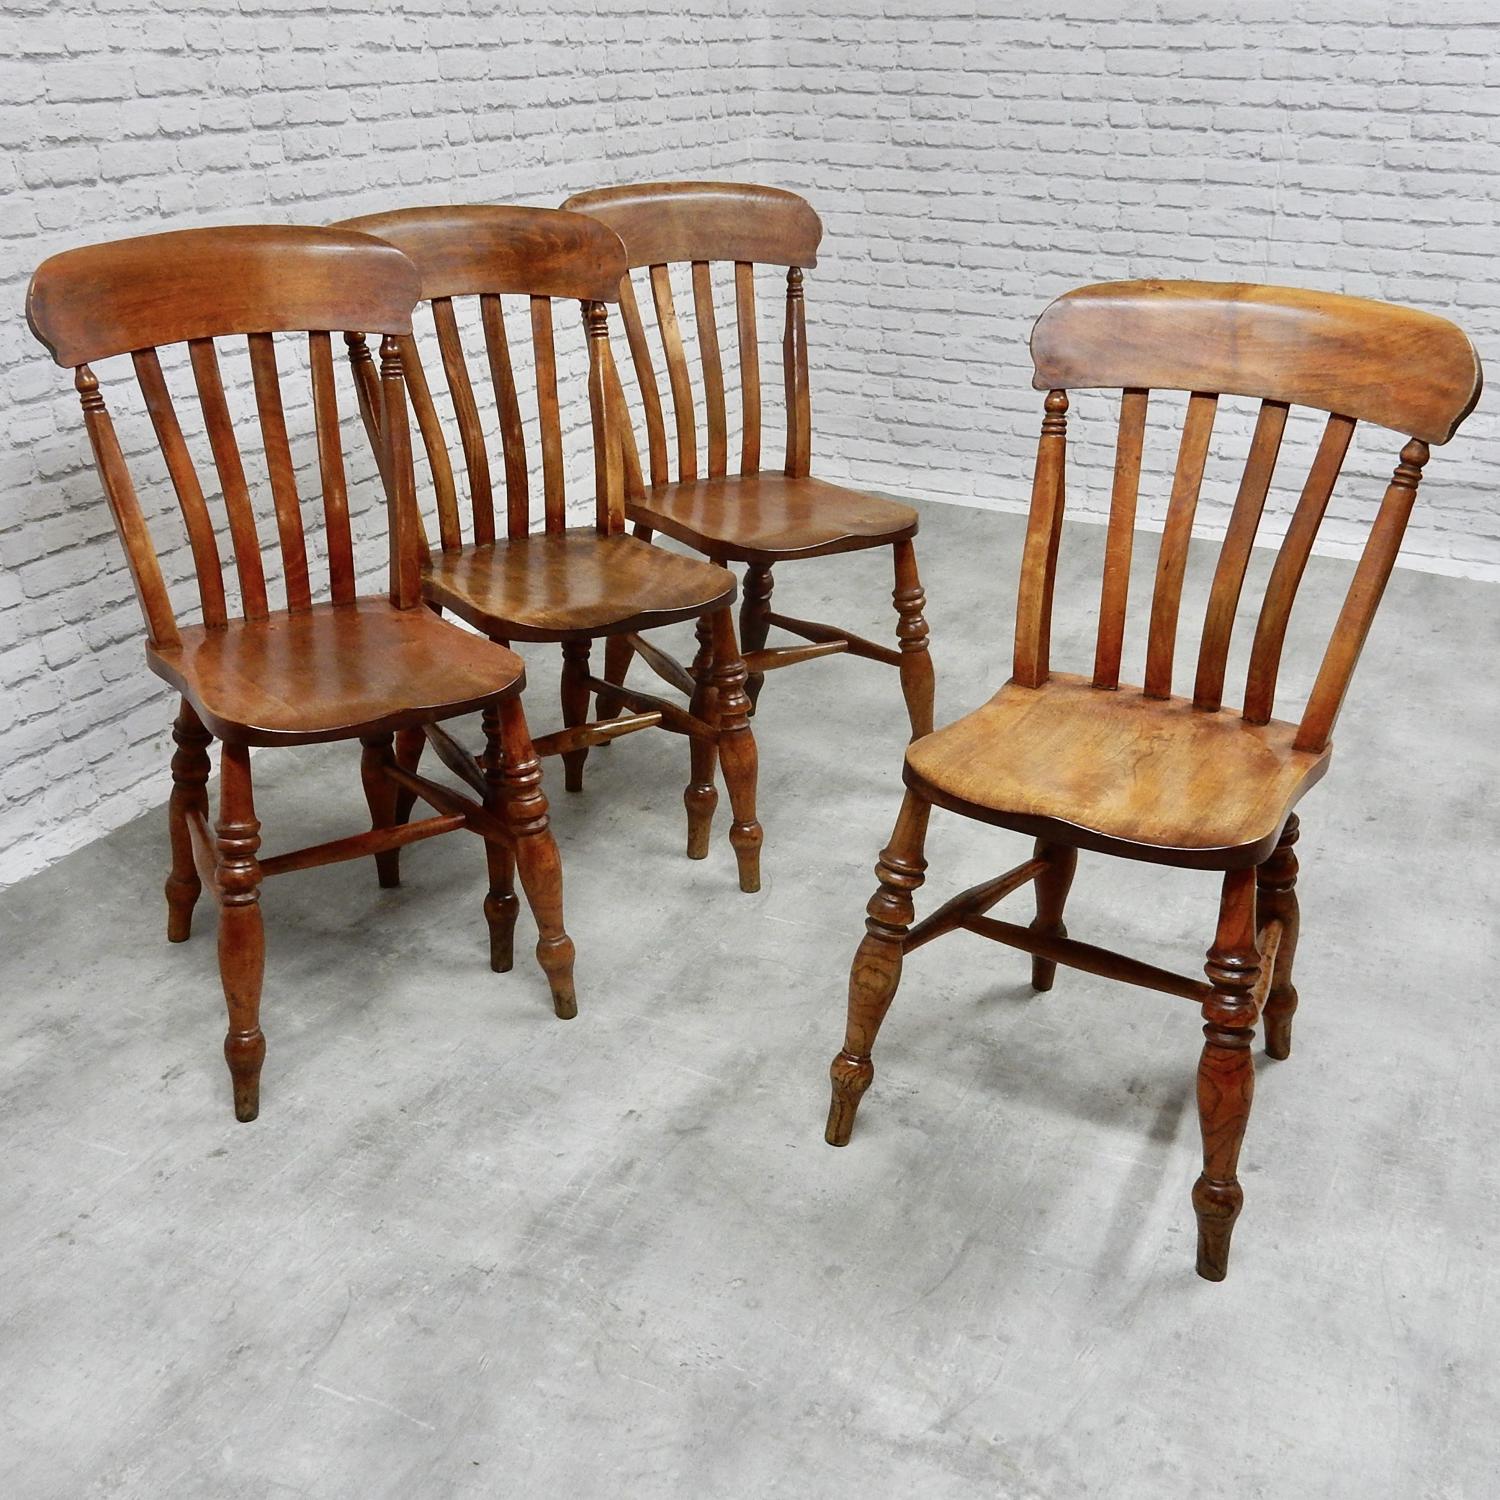 Large Country Kitchen Chairs